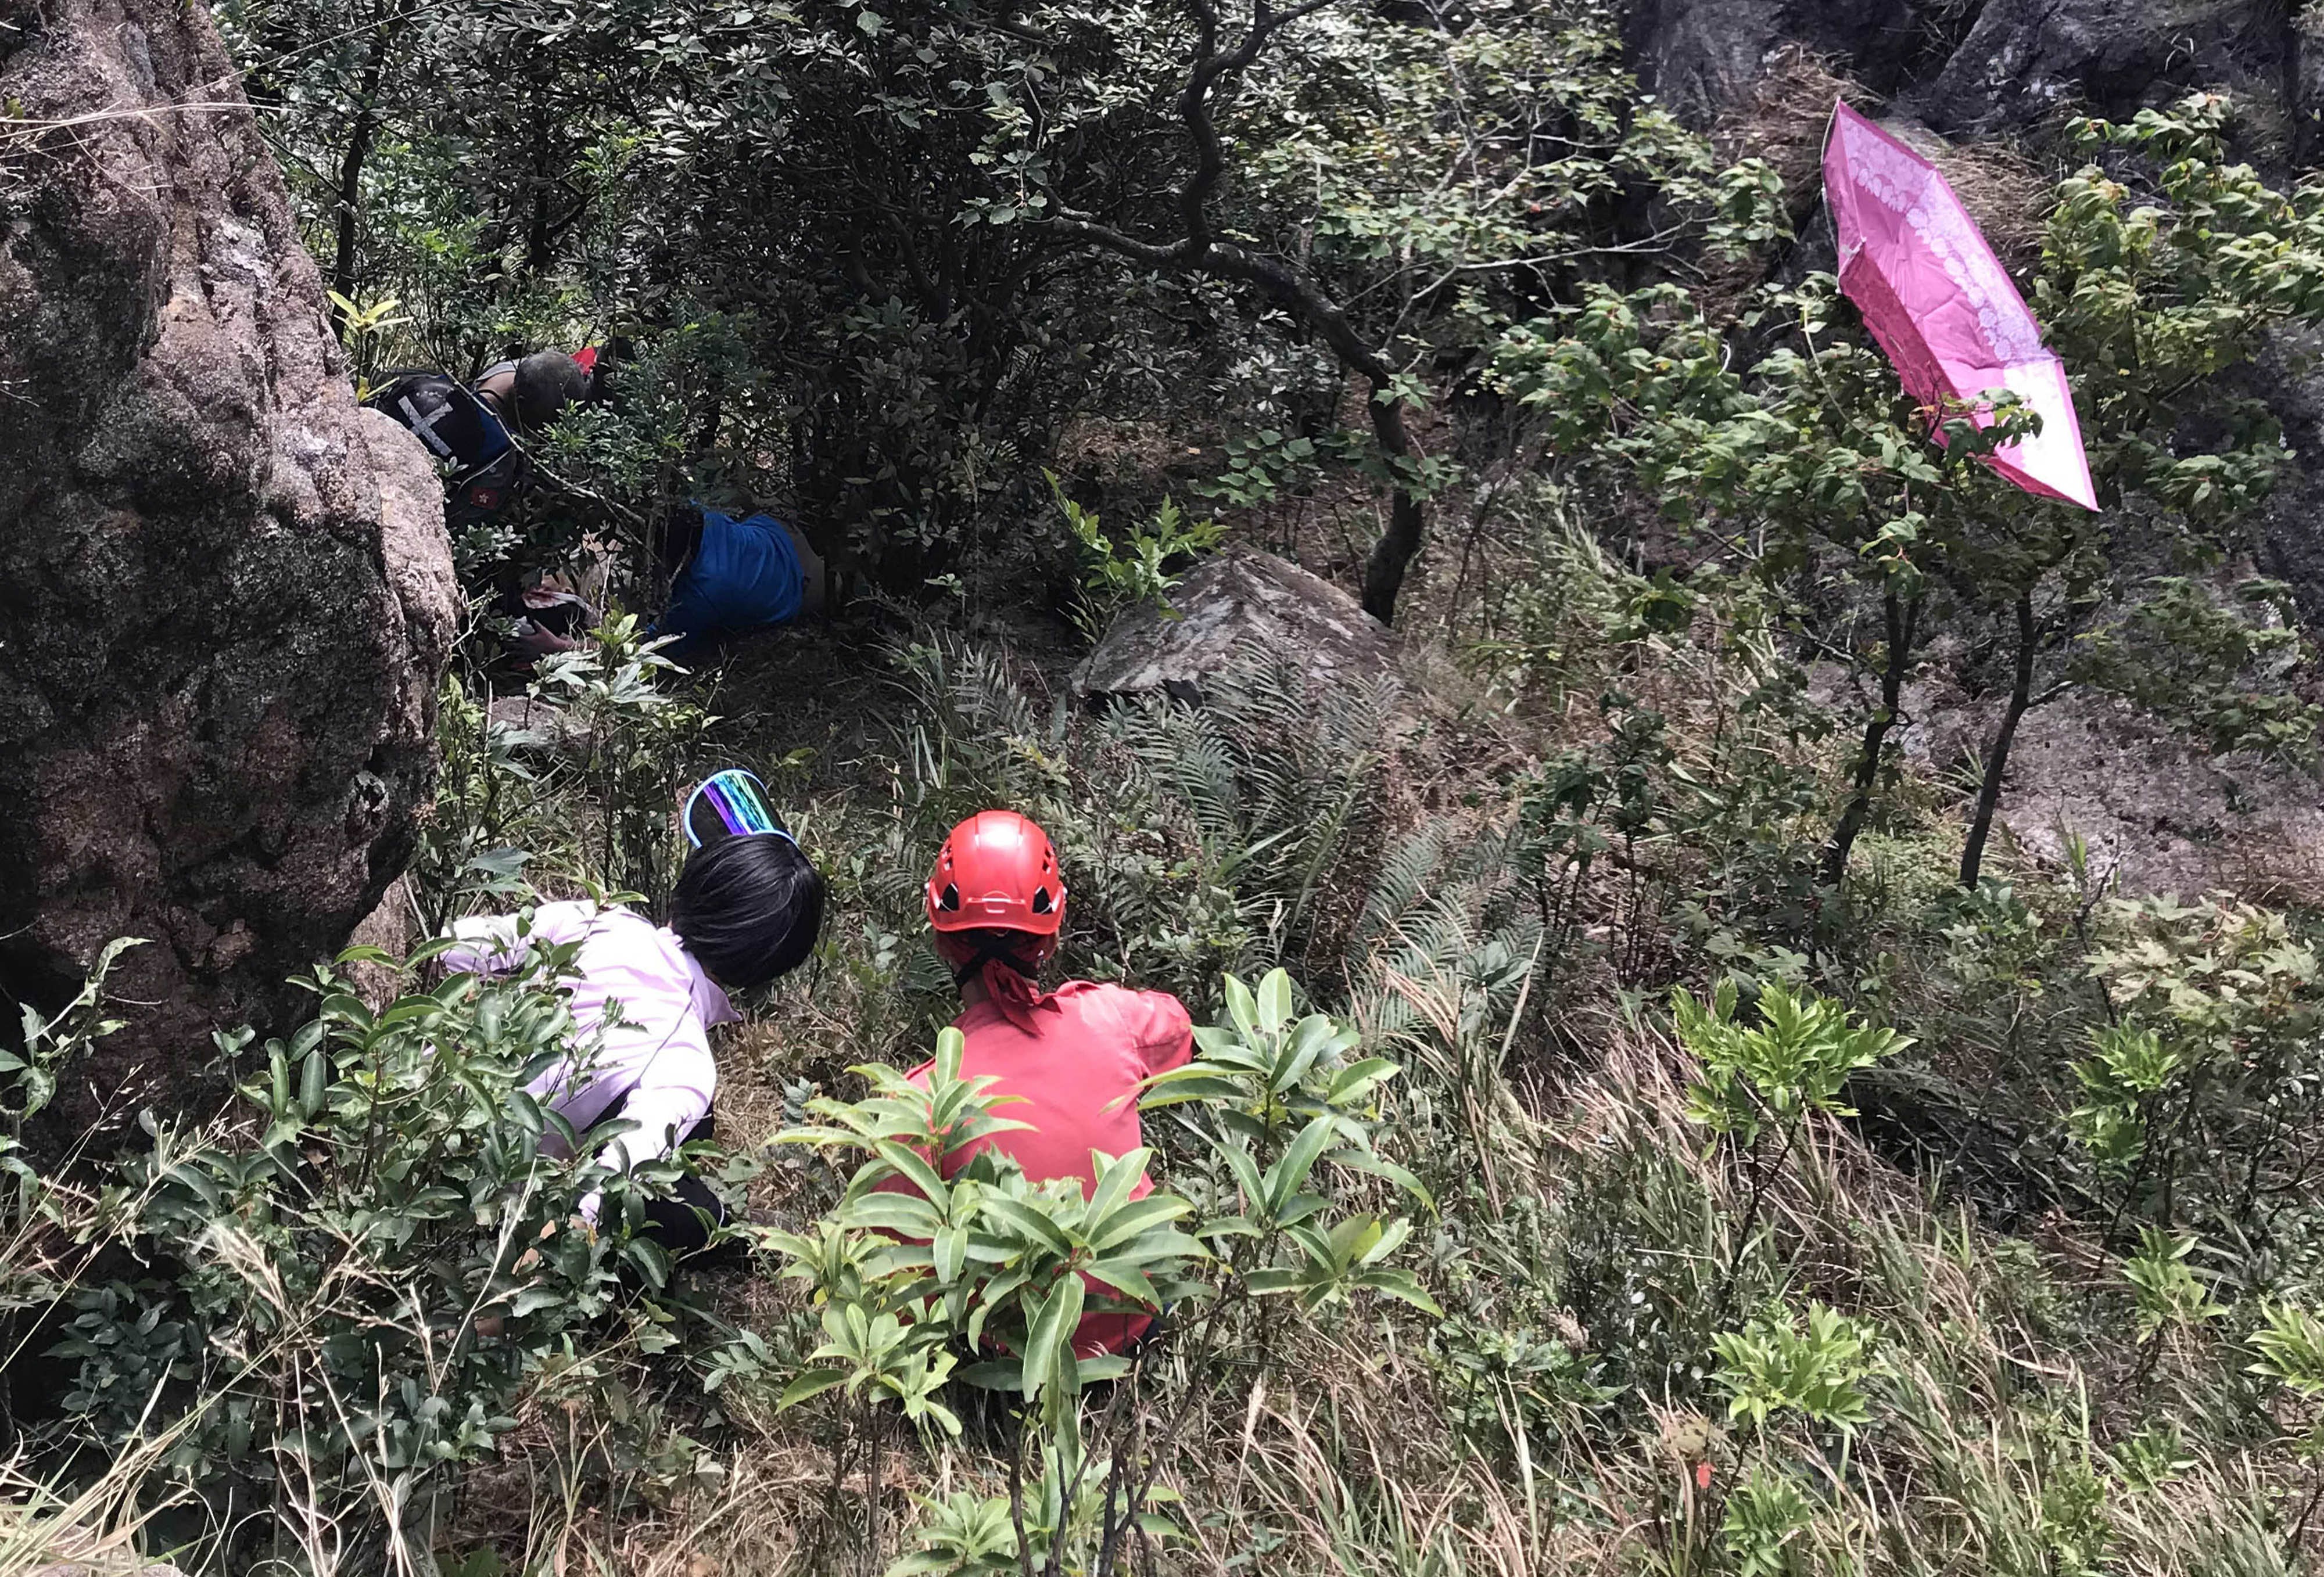 Rescuers from the Government Flying Service took about an hour to find the man. Photo: Handout